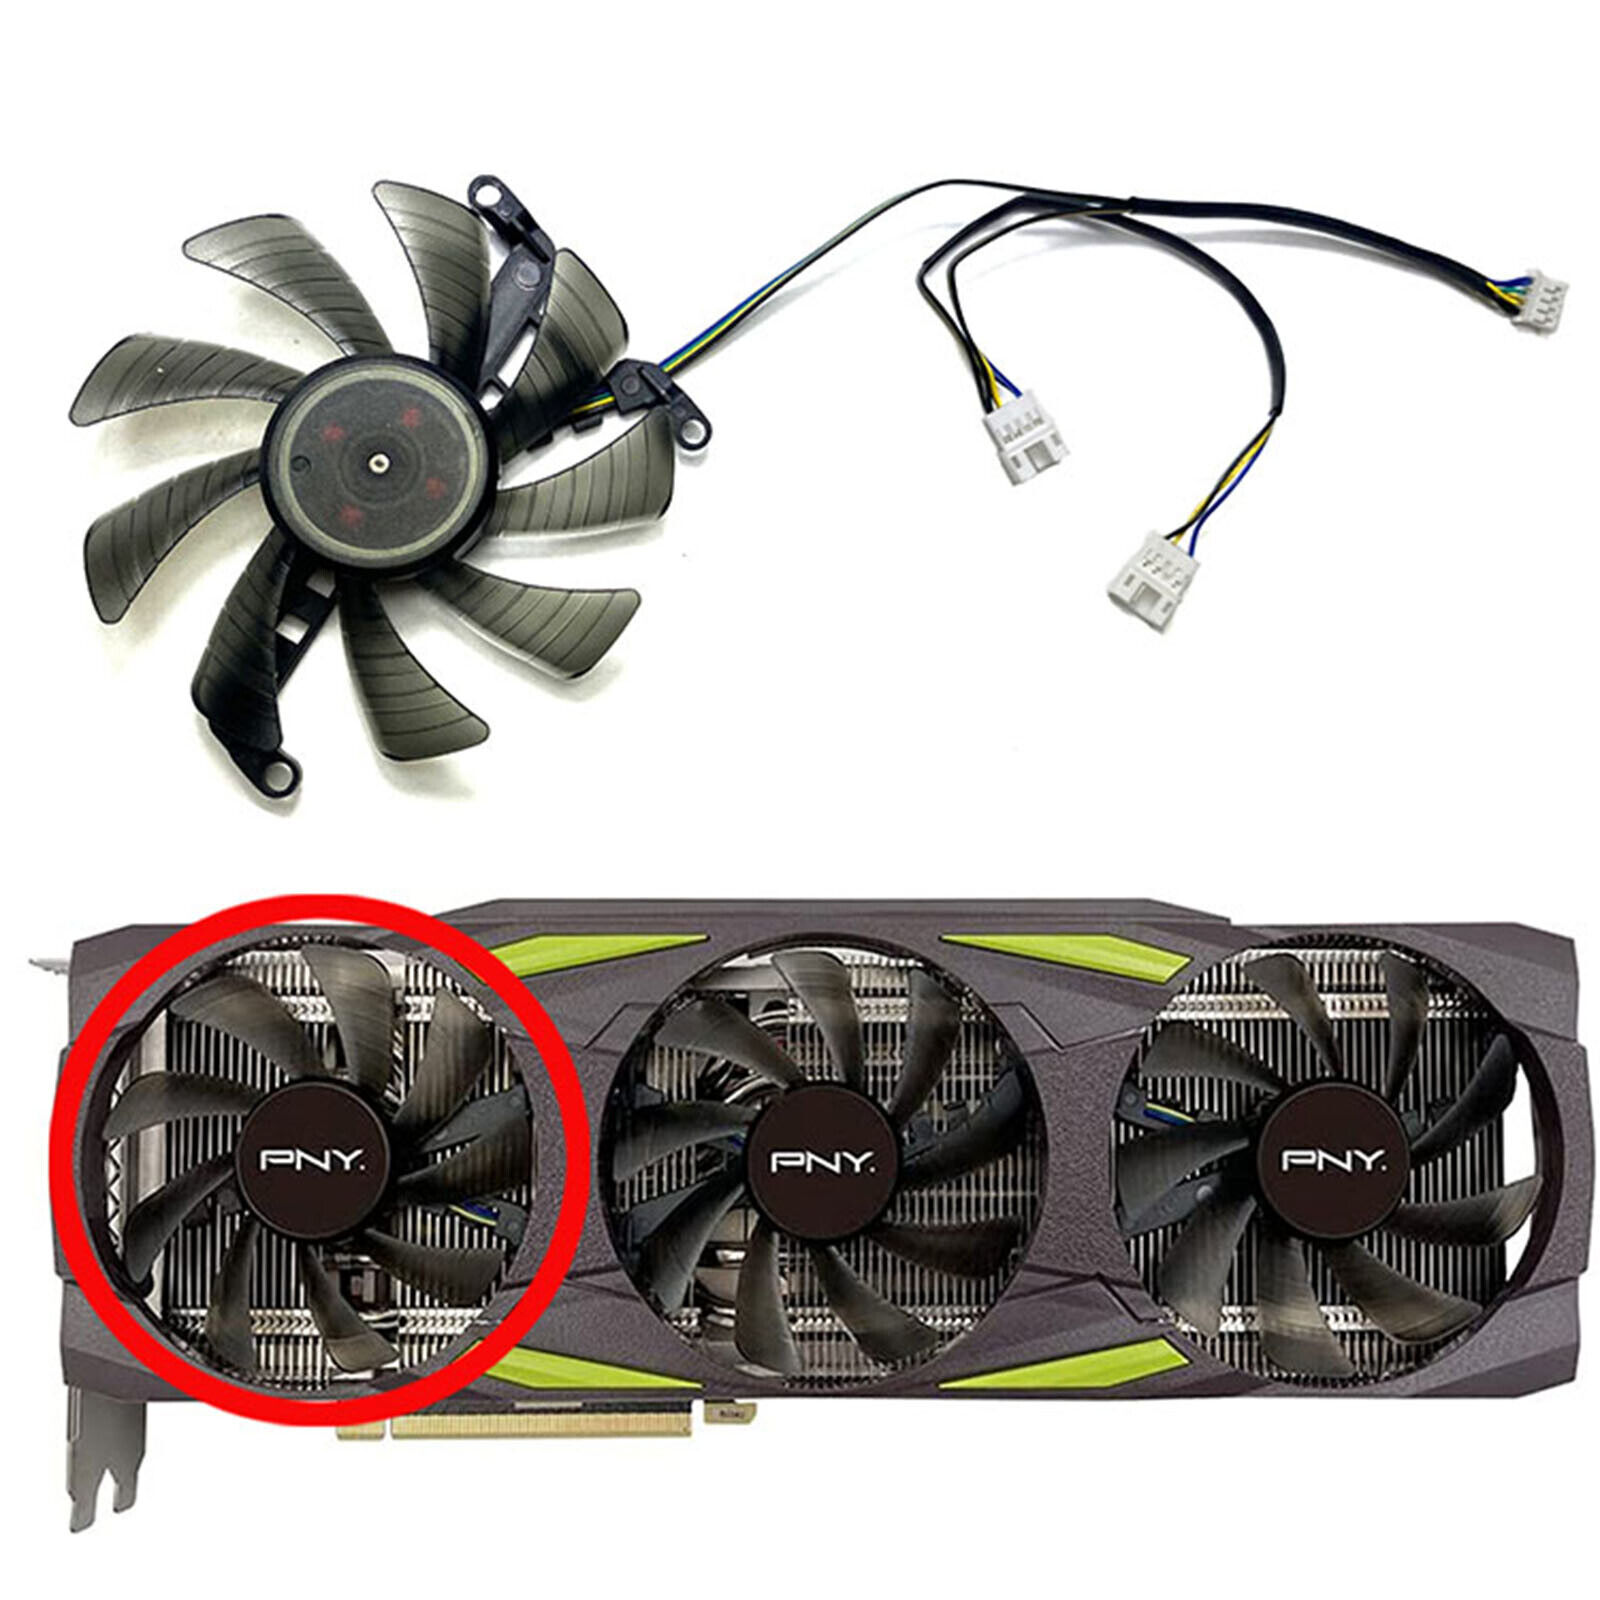 New Graphics Card Fan Coiling Fan for PNY RTX3070ti 3080 3080ti 3090 Triple Fans